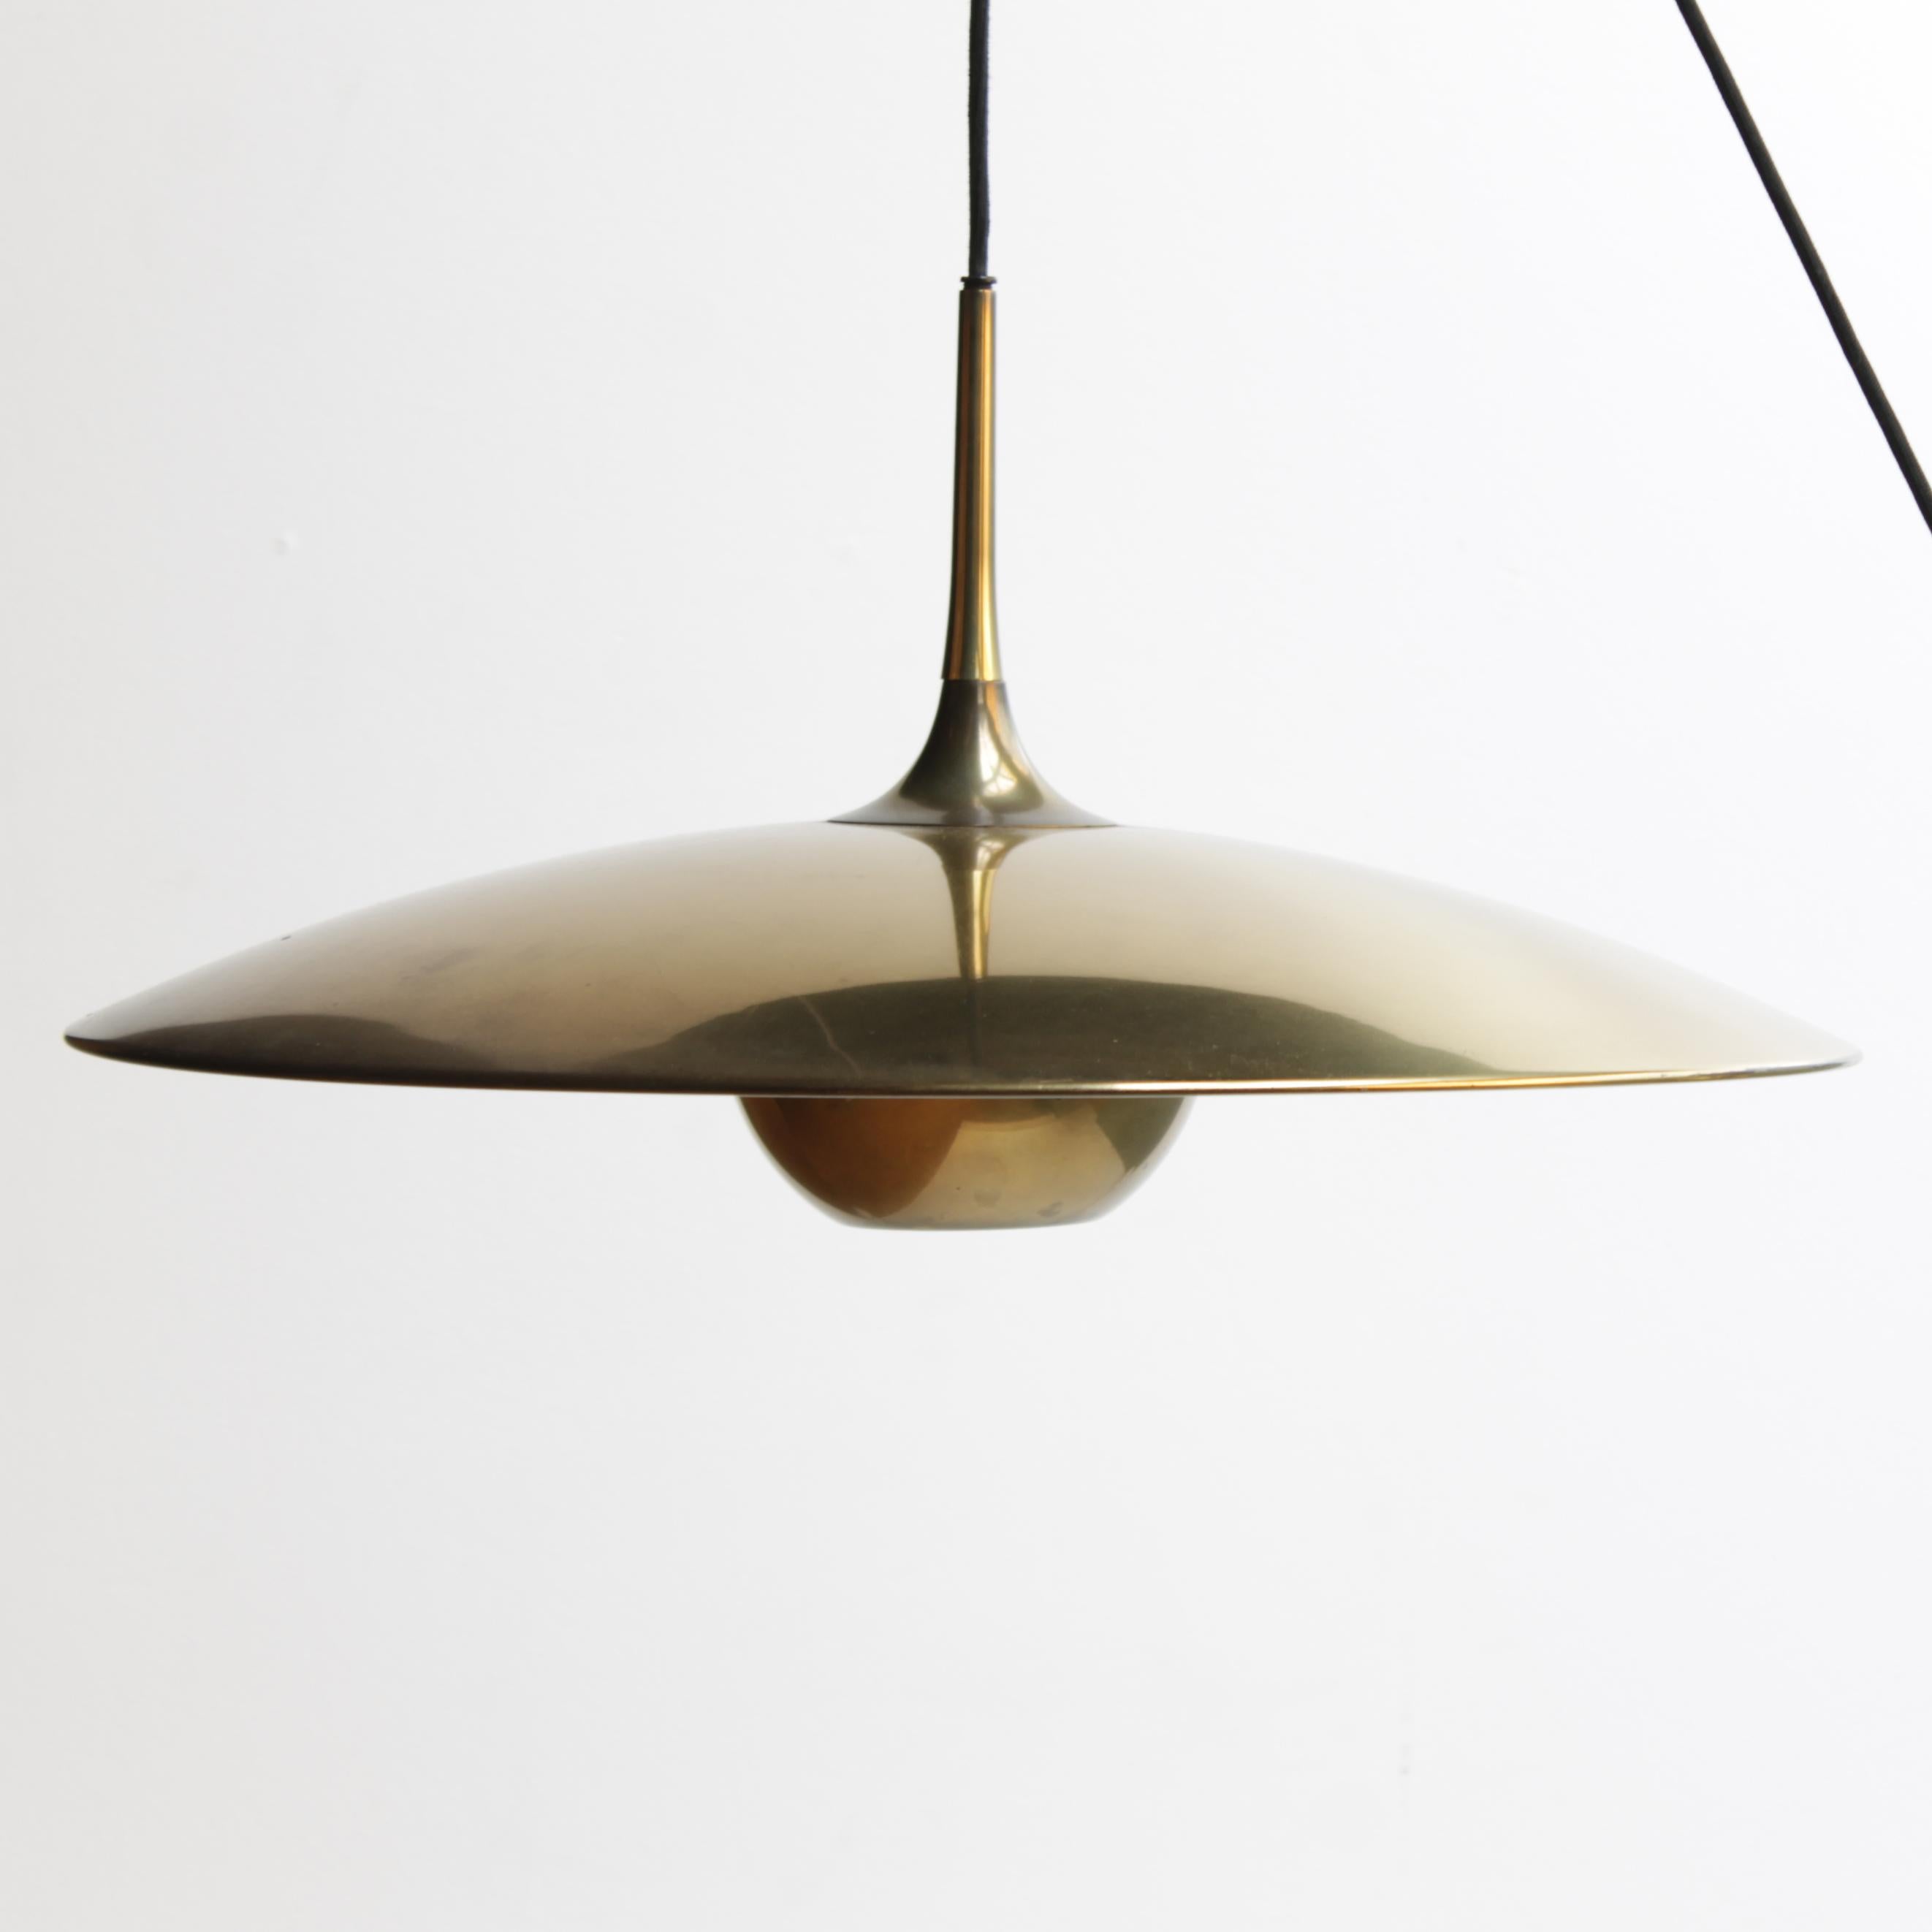 Vintage Brass Counterweight Pendant 'Onos 55' by Florian Schulz, Germany 2